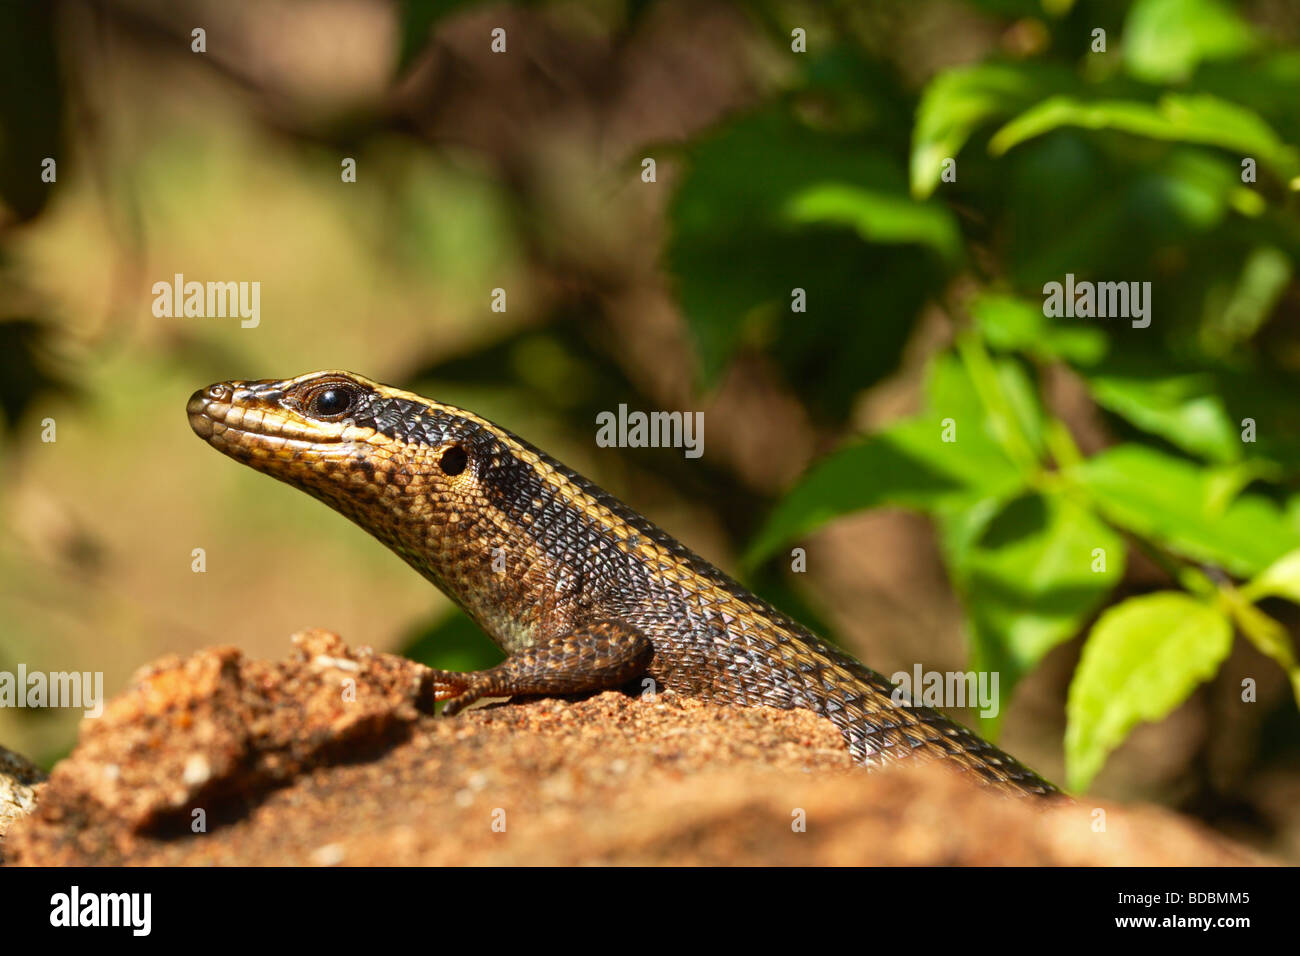 Skink lizard sunning on a rock in Northwest Province, South Africa Stock Photo